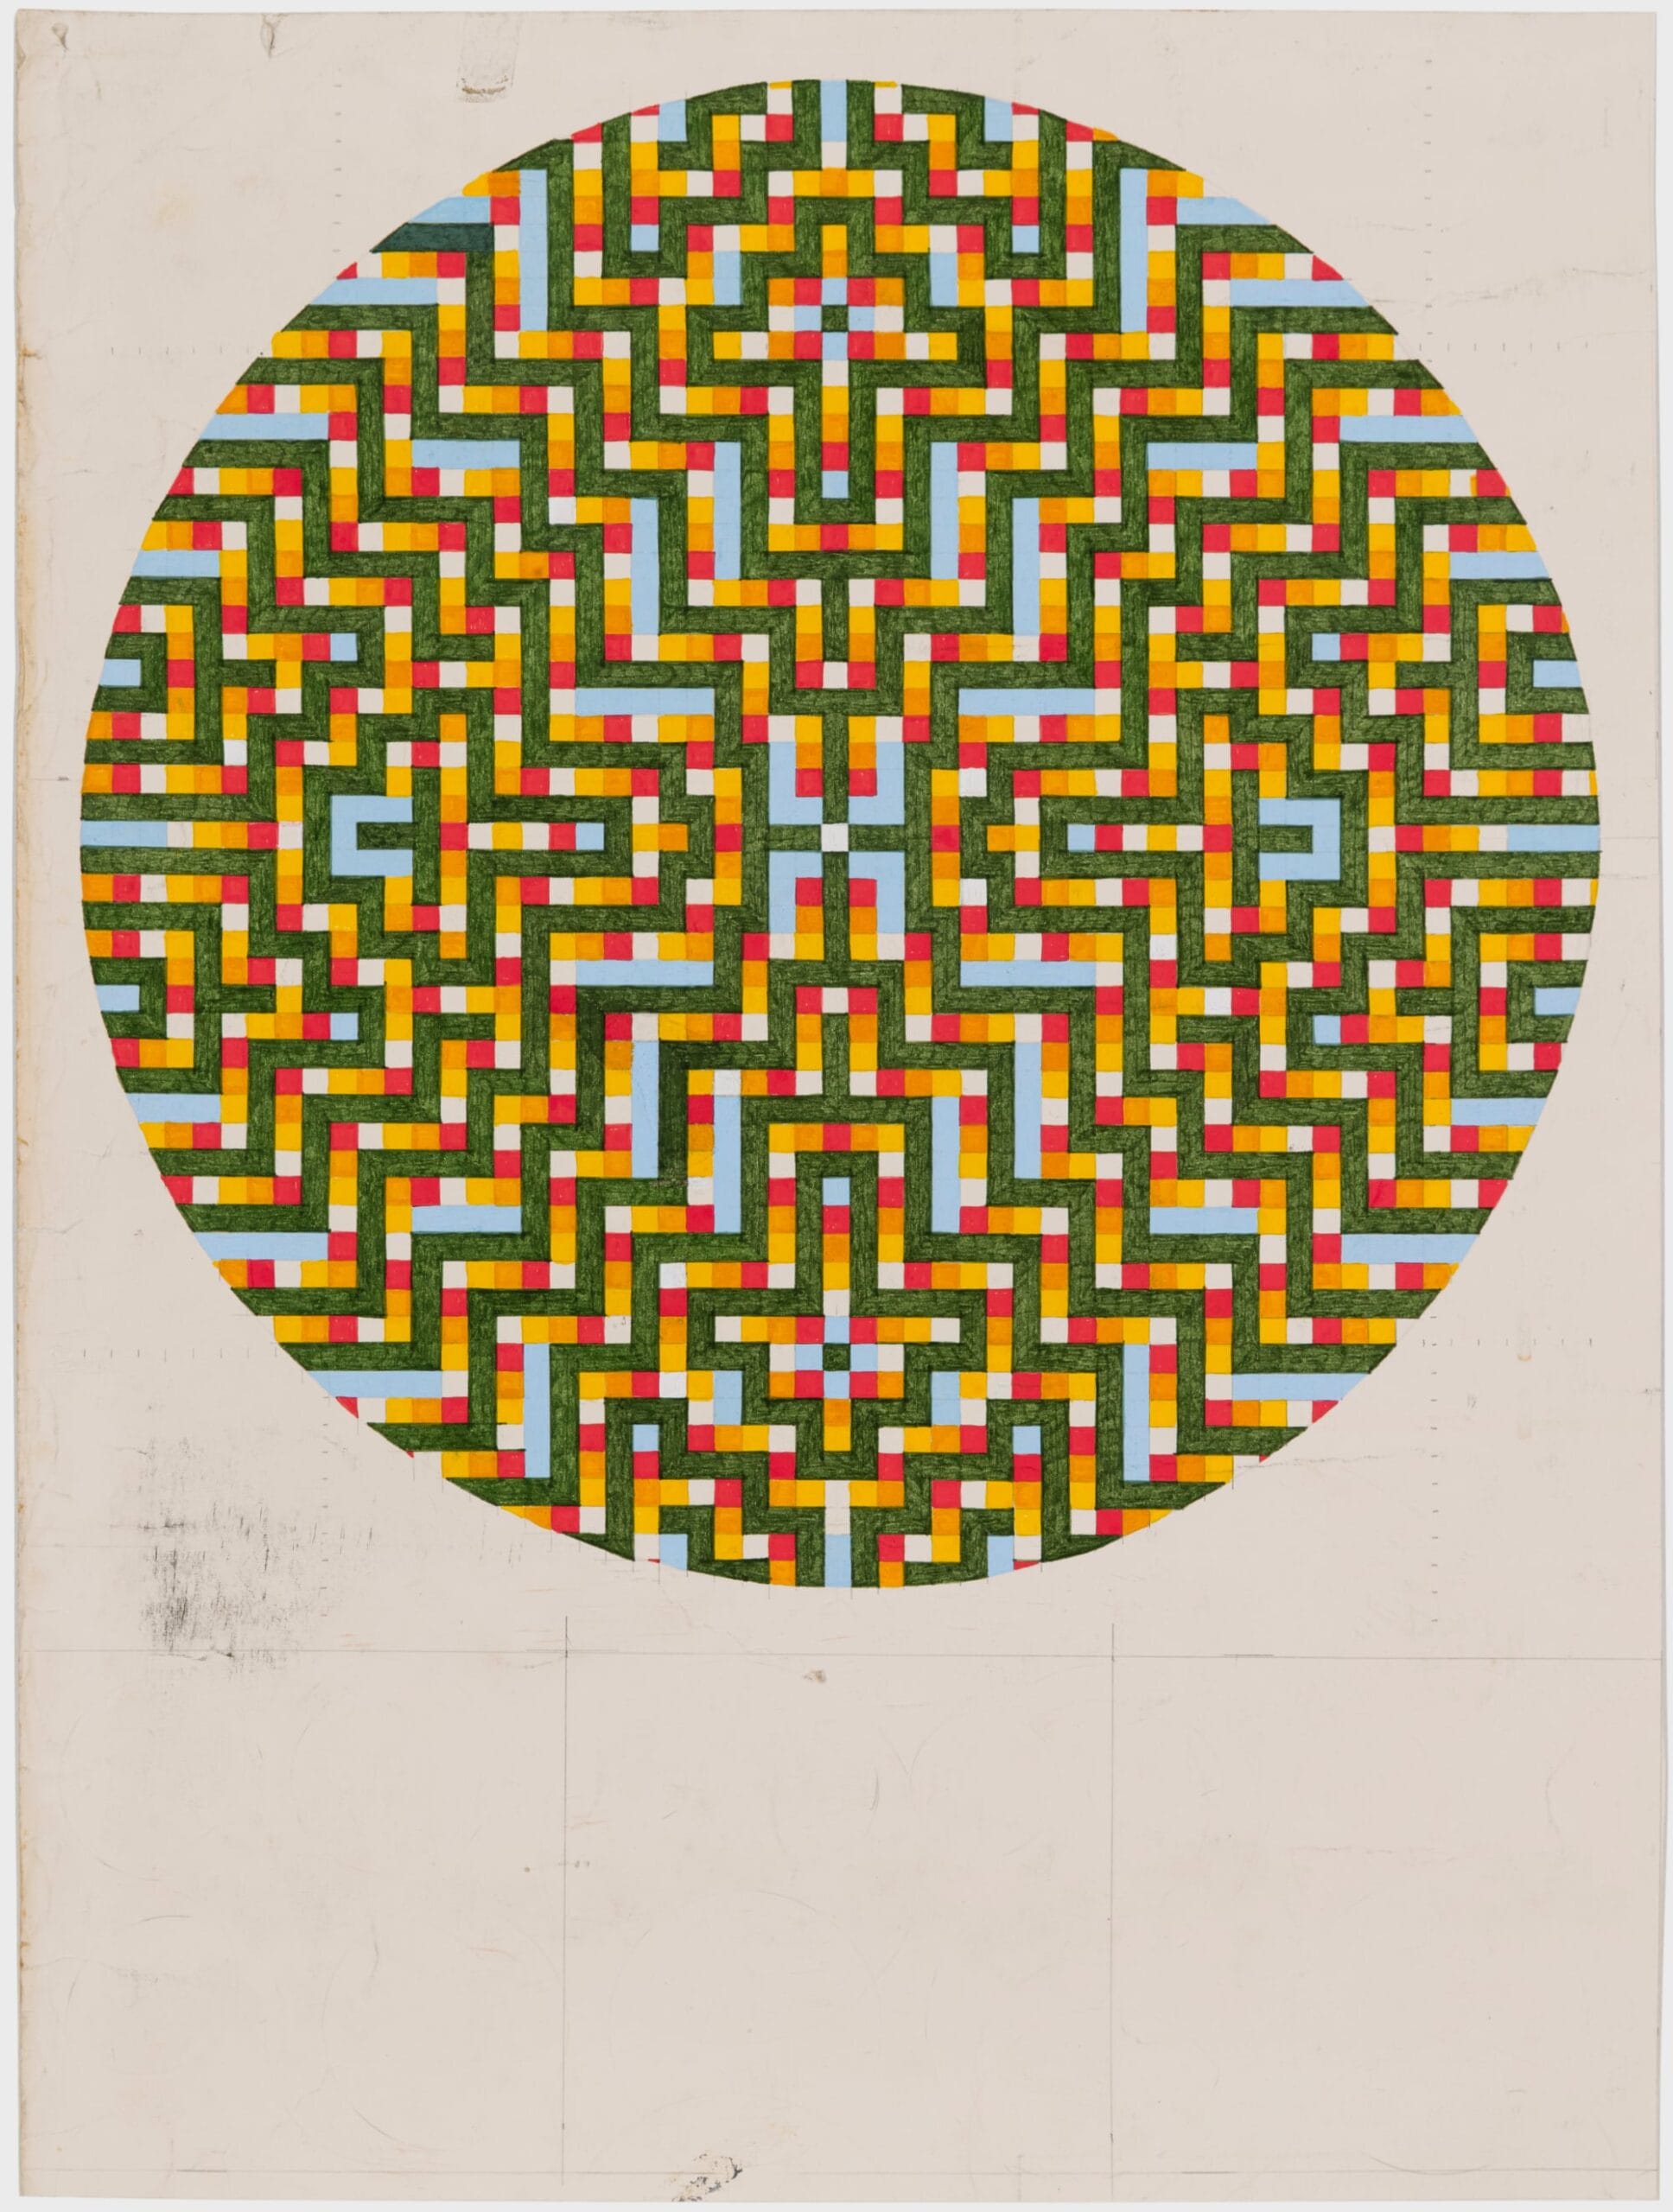 a vibrant symmetric motif rendered on gridded paper in the shape of a circle